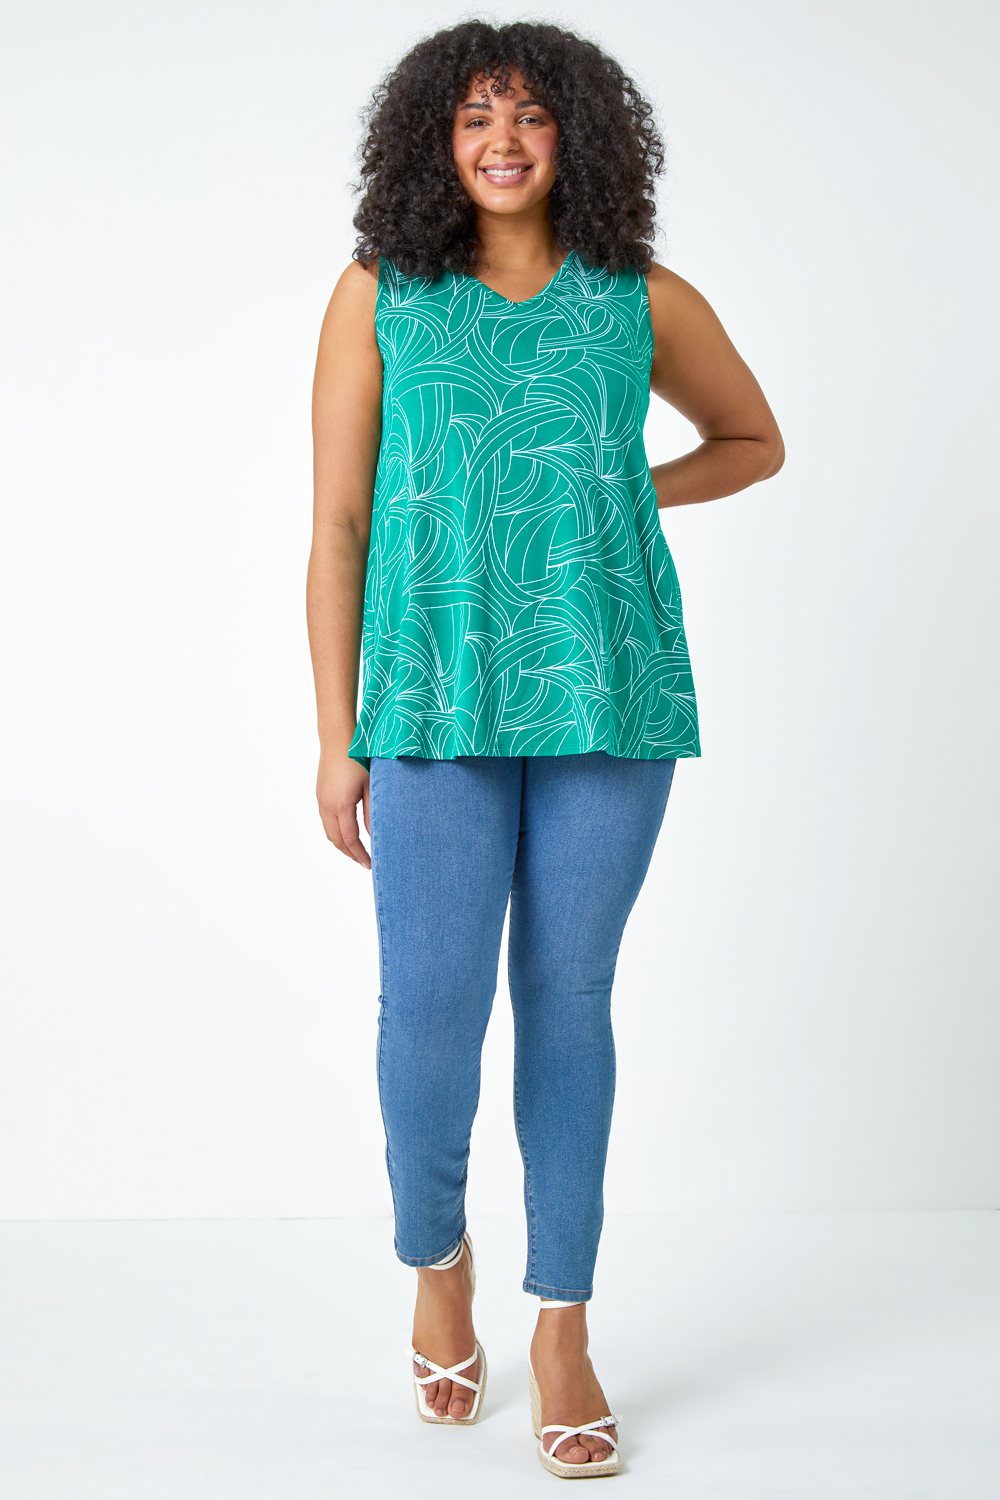 Green Curve Abstract Swirl Stretch Vest Top, Image 2 of 6